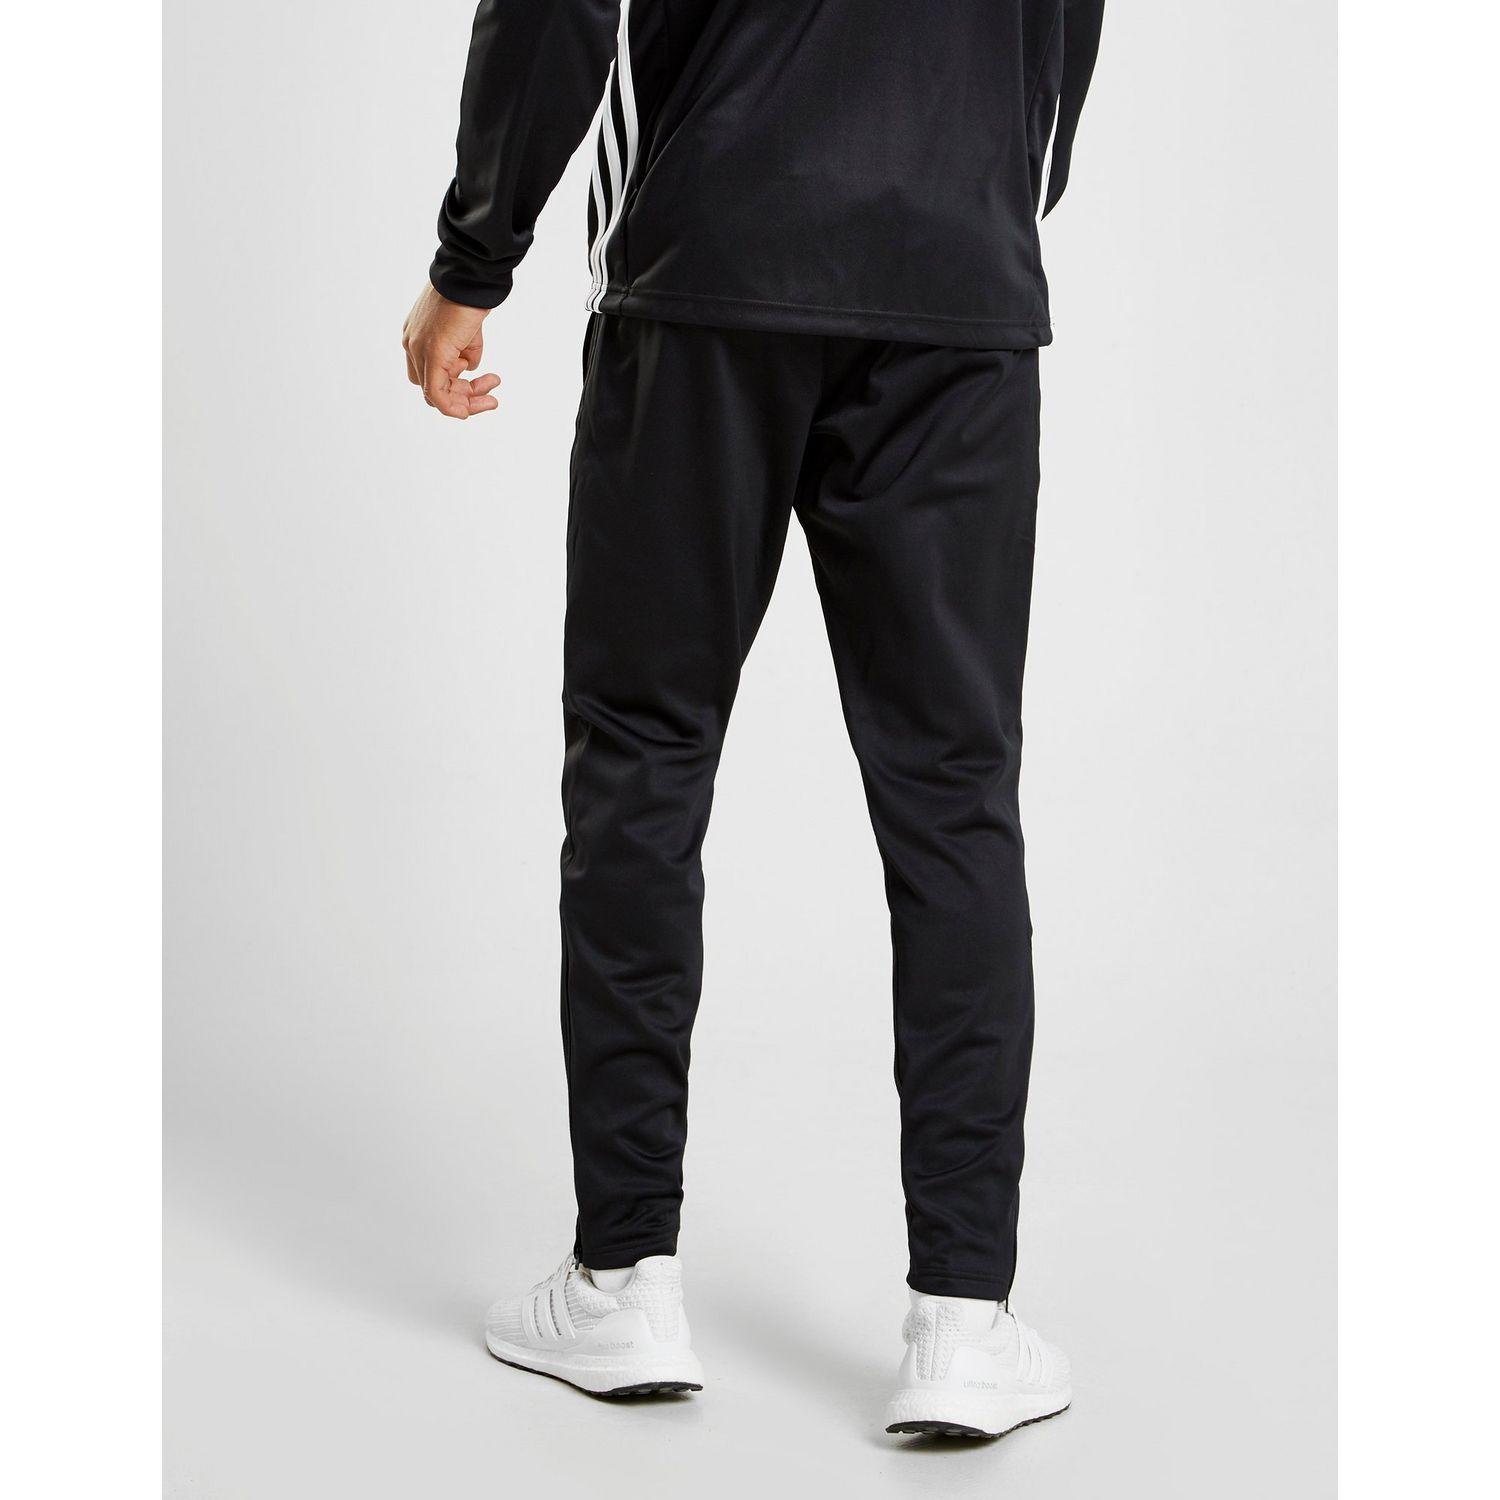 adidas Synthetic Tiro Warm Up Track Pants in Black for Men - Lyst